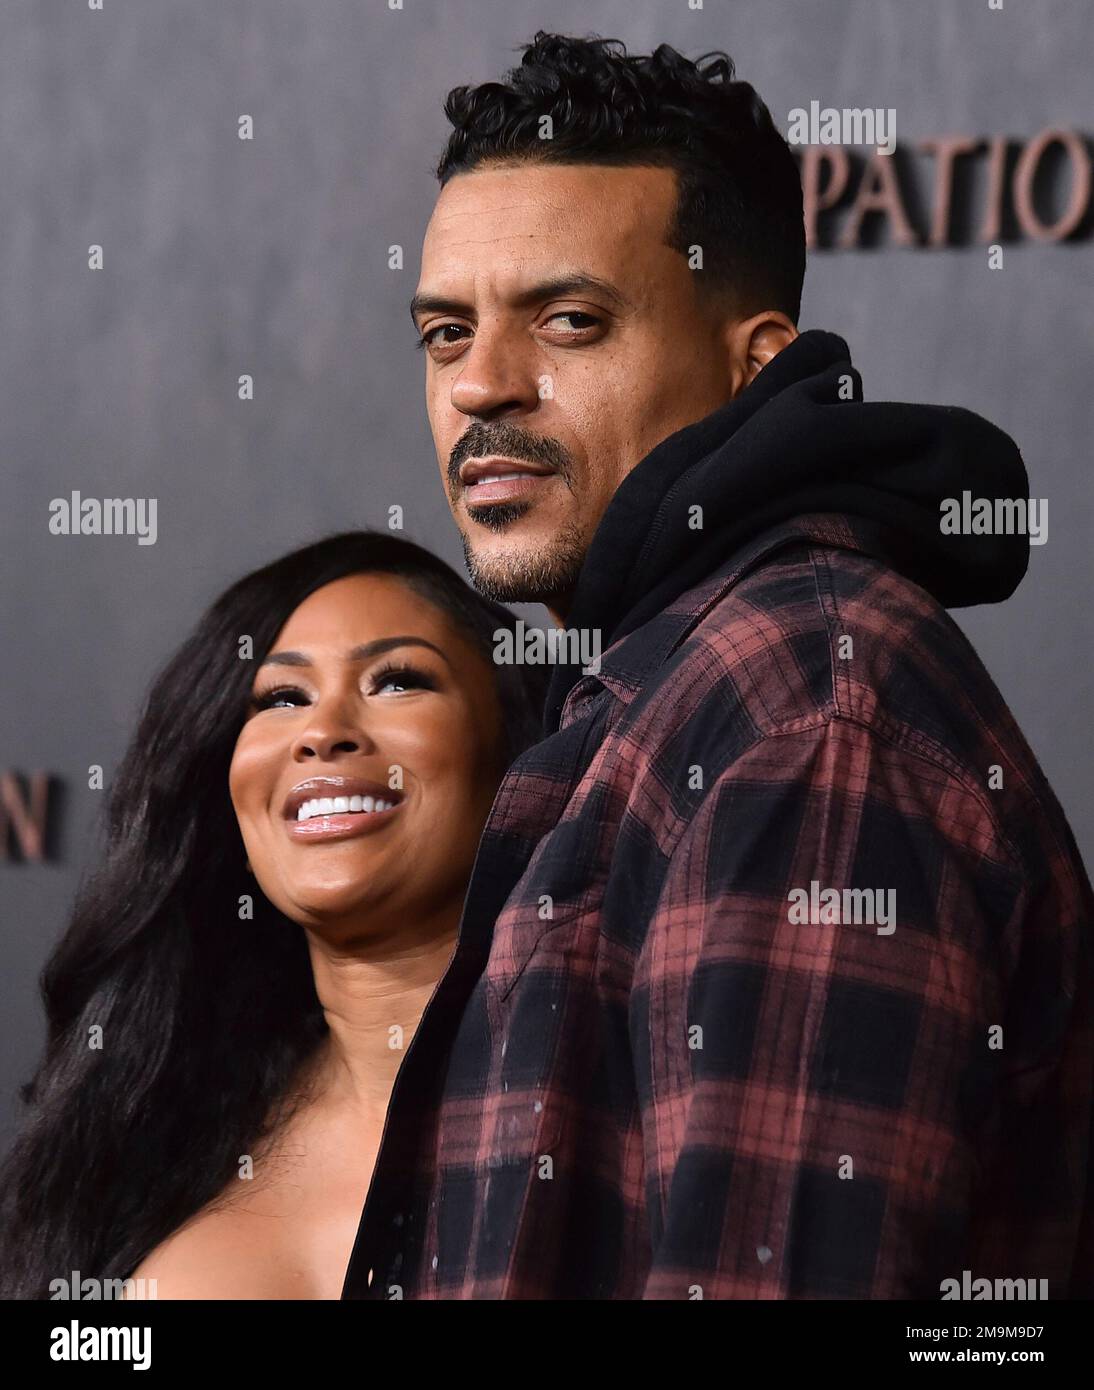 Anansa Sims, left, and Matt Barnes arrive at the premiere of  Emancipation, Wednesday, Nov. 30, 2022, at the Regency Village Theatre in  Los Angeles. (Photo by Jordan Strauss/Invision/AP Stock Photo - Alamy